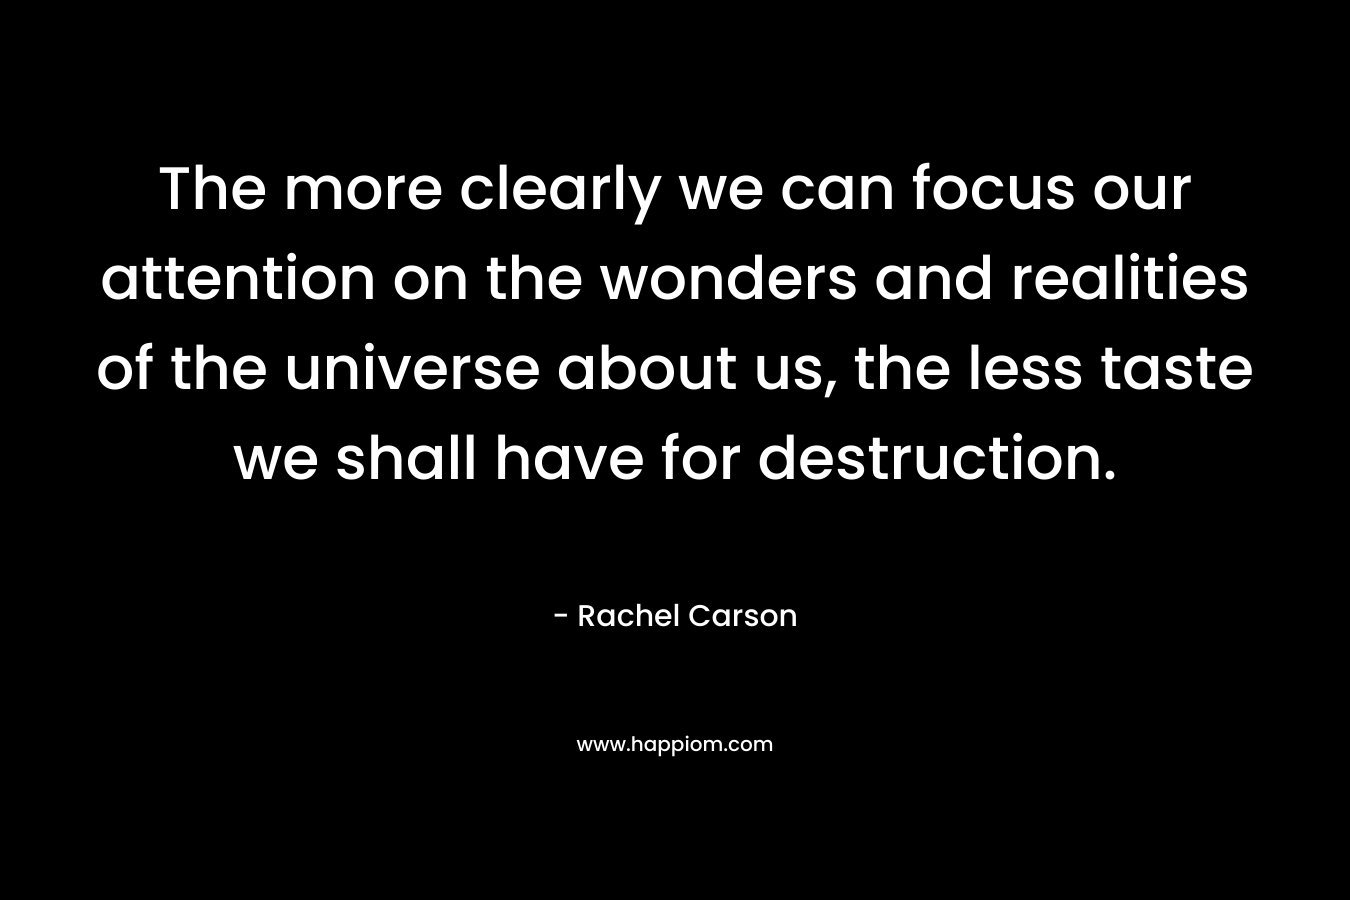 The more clearly we can focus our attention on the wonders and realities of the universe about us, the less taste we shall have for destruction.